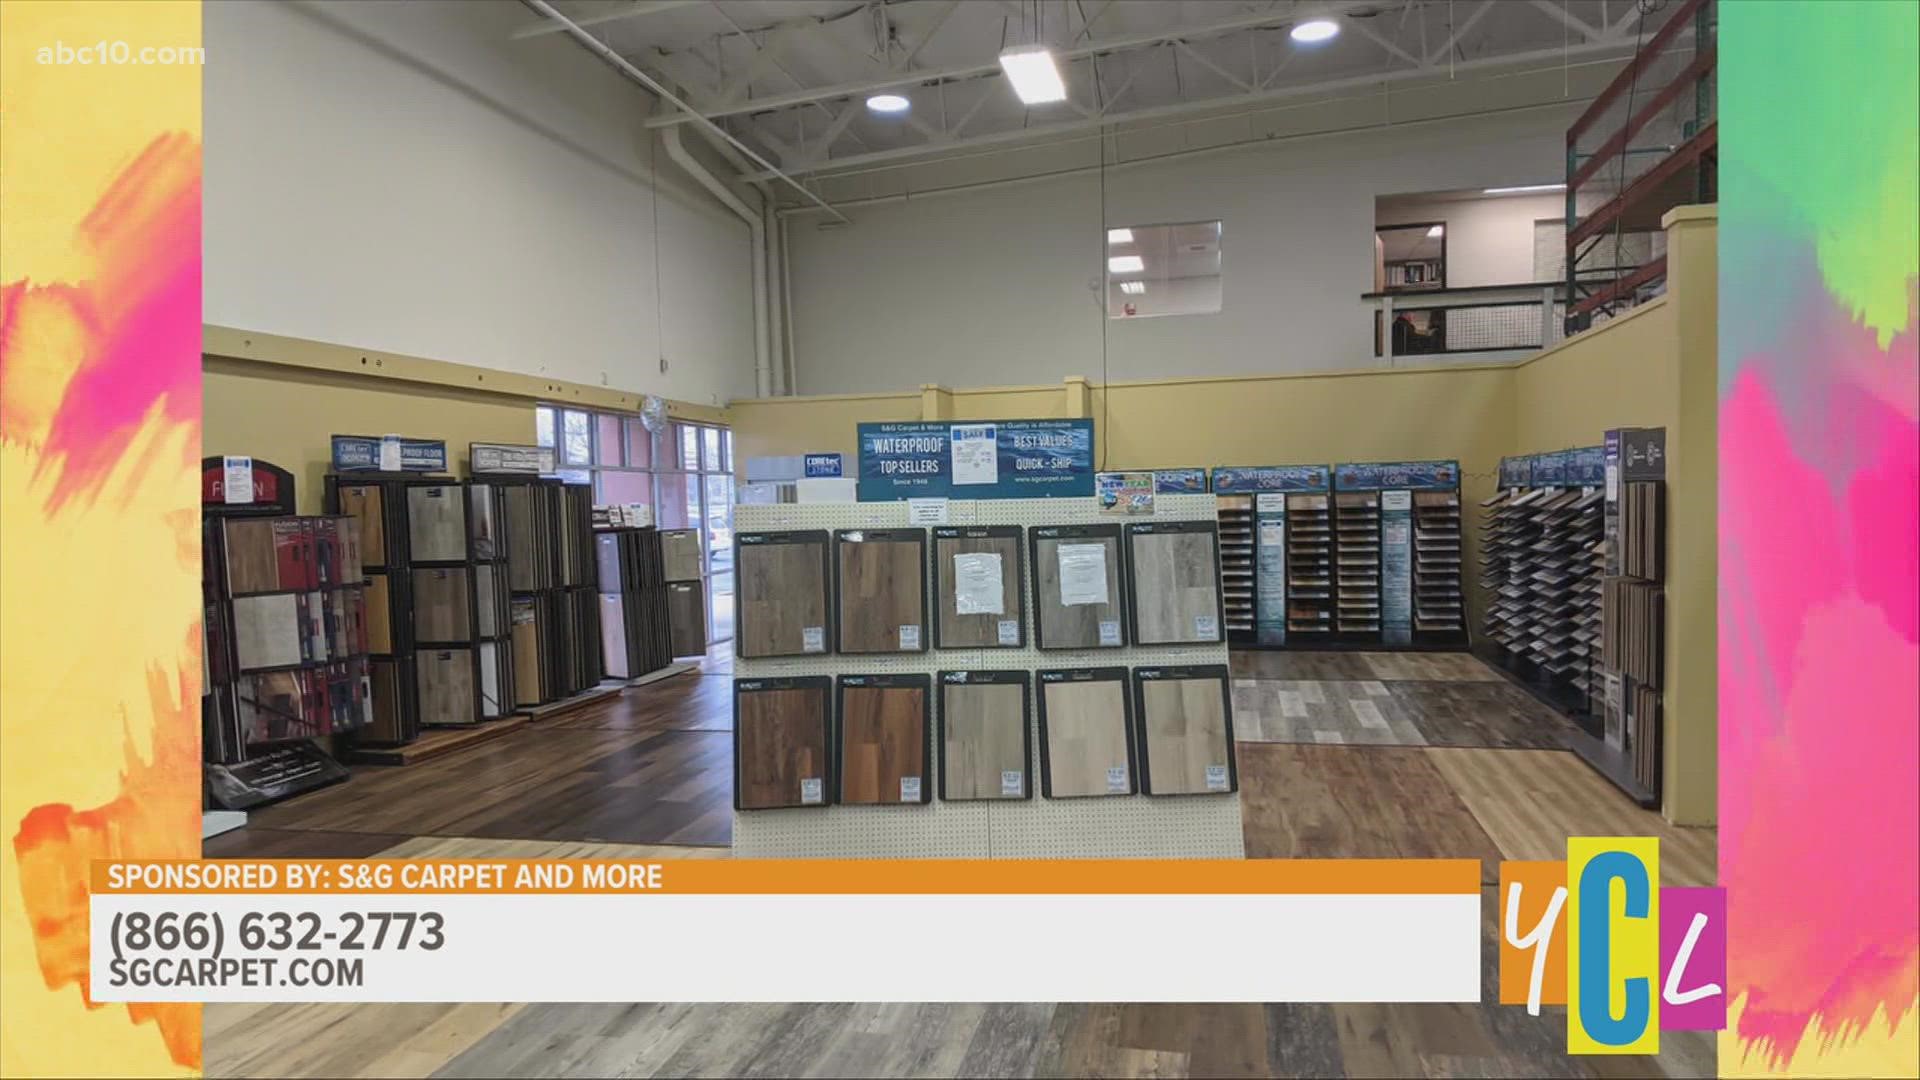 Spruce up the home by being in the know on the latest flooring trends. This segment paid for by S&G Carpet and More.